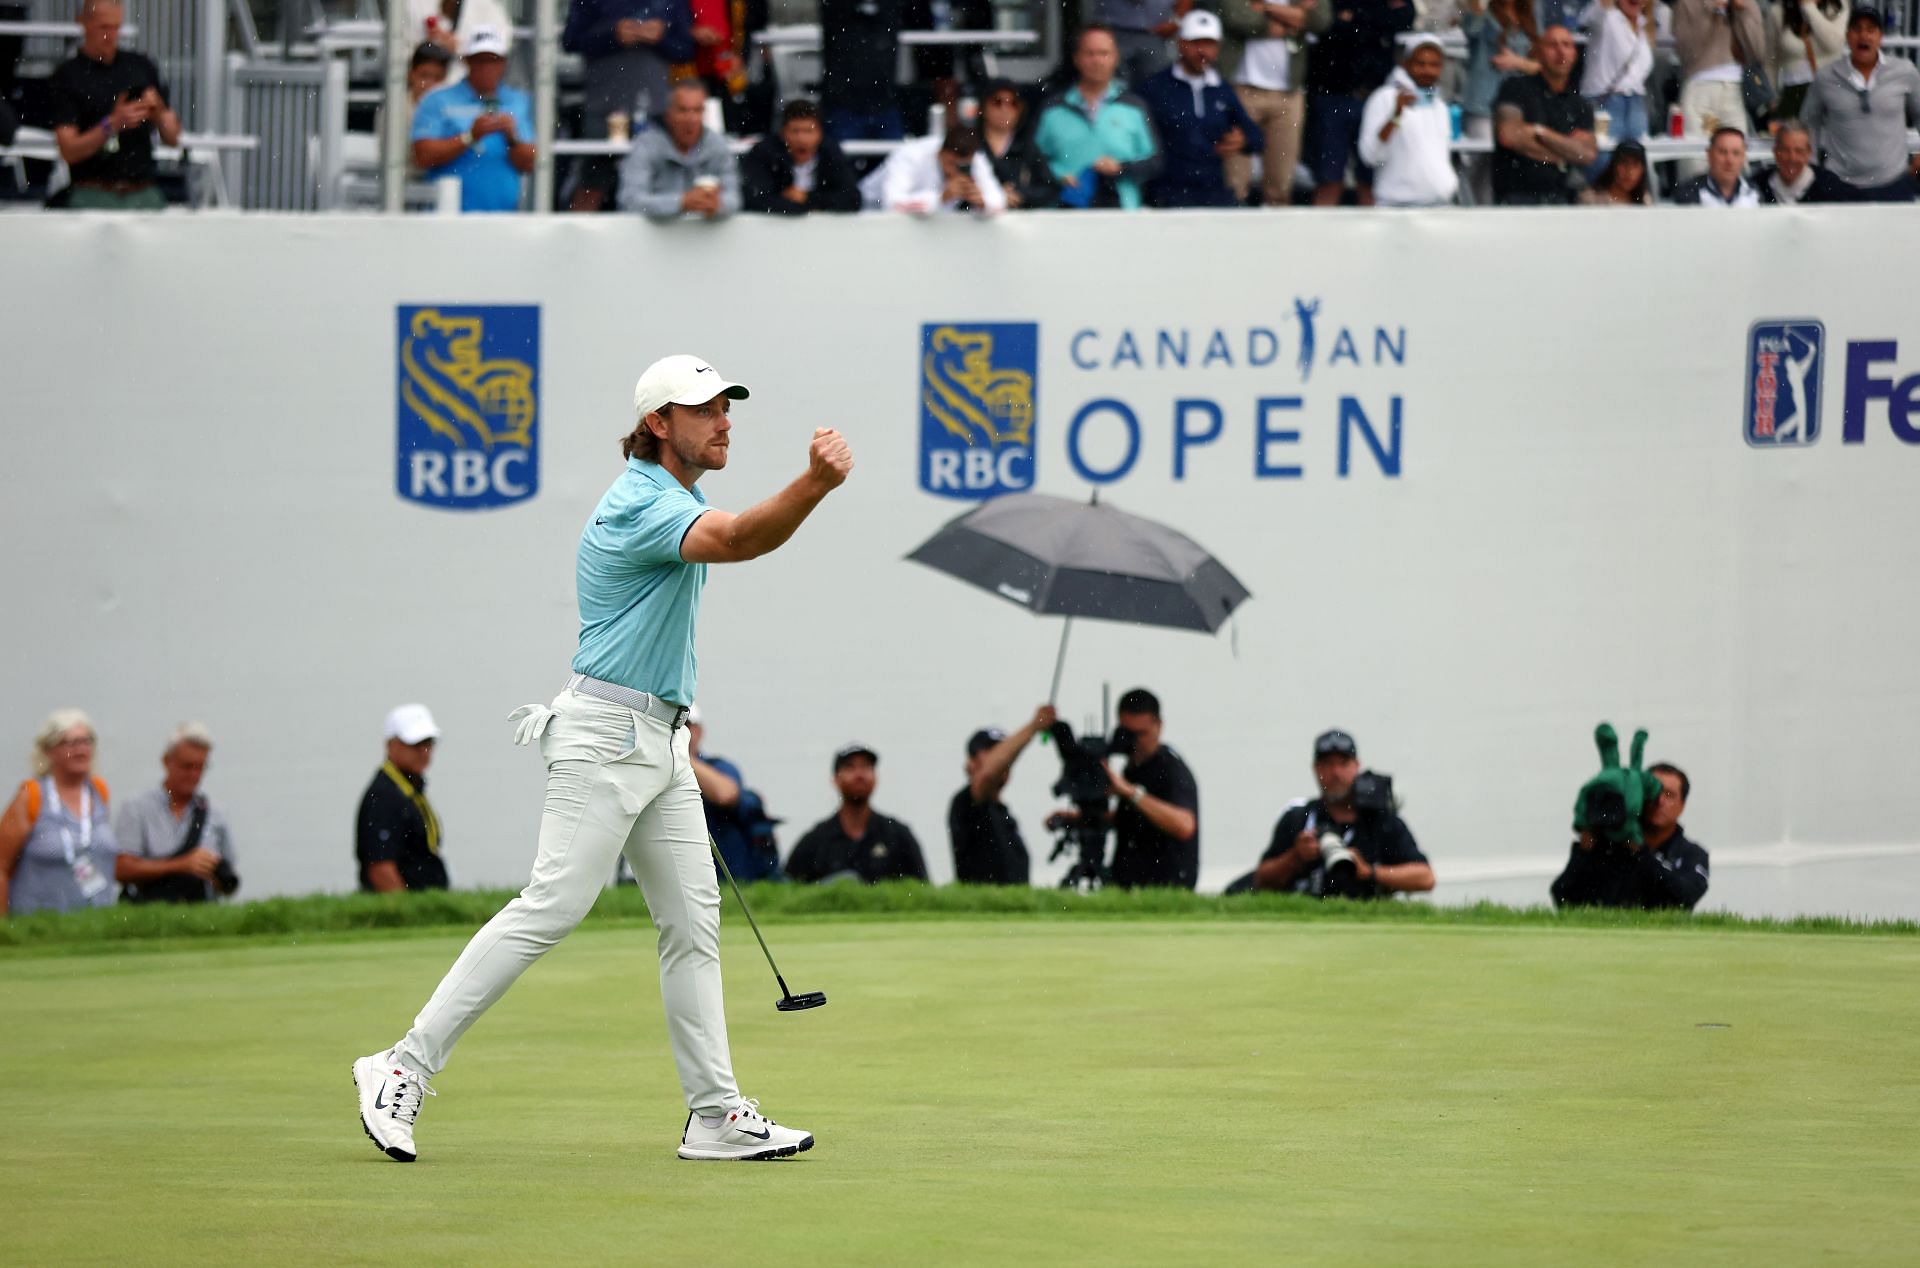 The RBC Canadian Open is moving venues